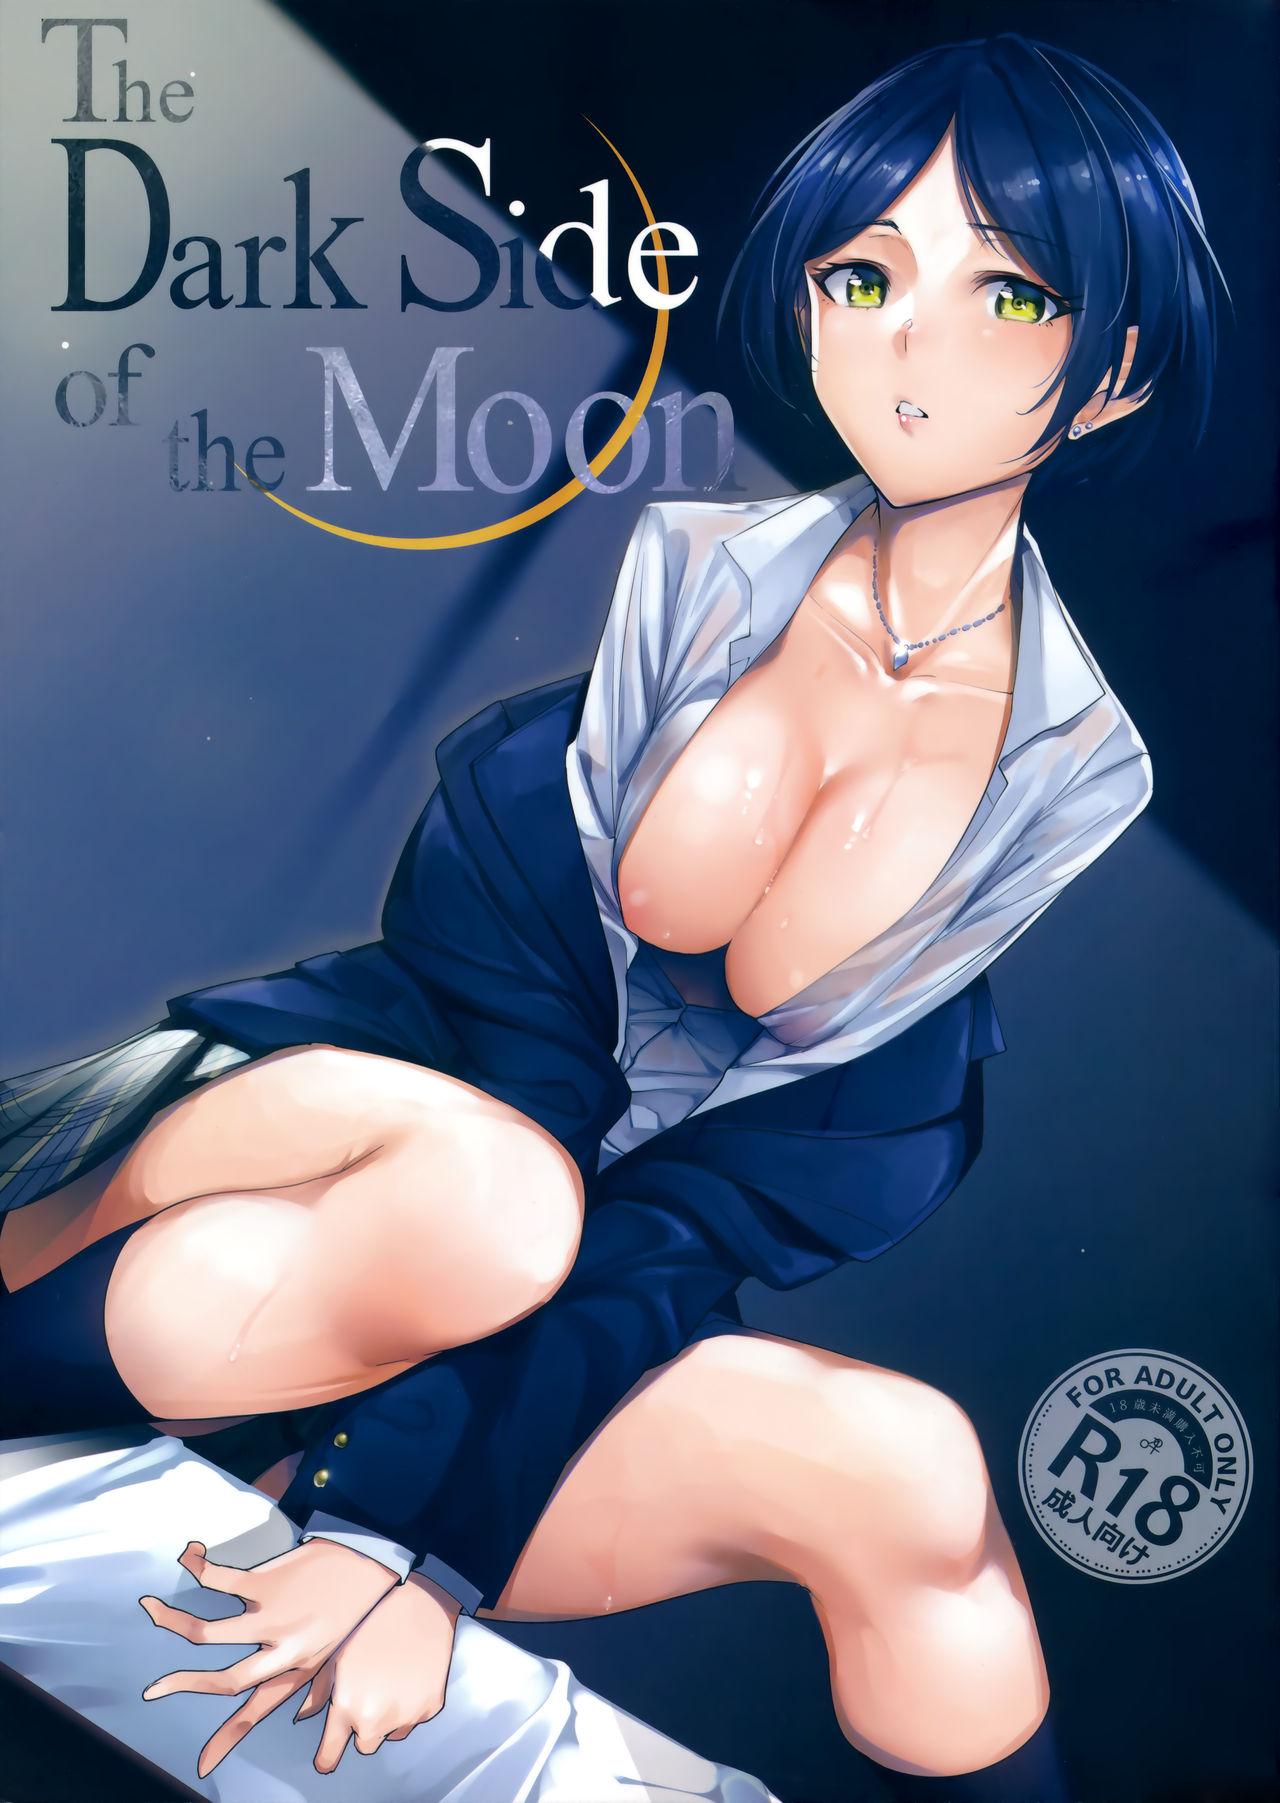 Satin The Dark Side of the Moon - The idolmaster Hardcore - Page 1